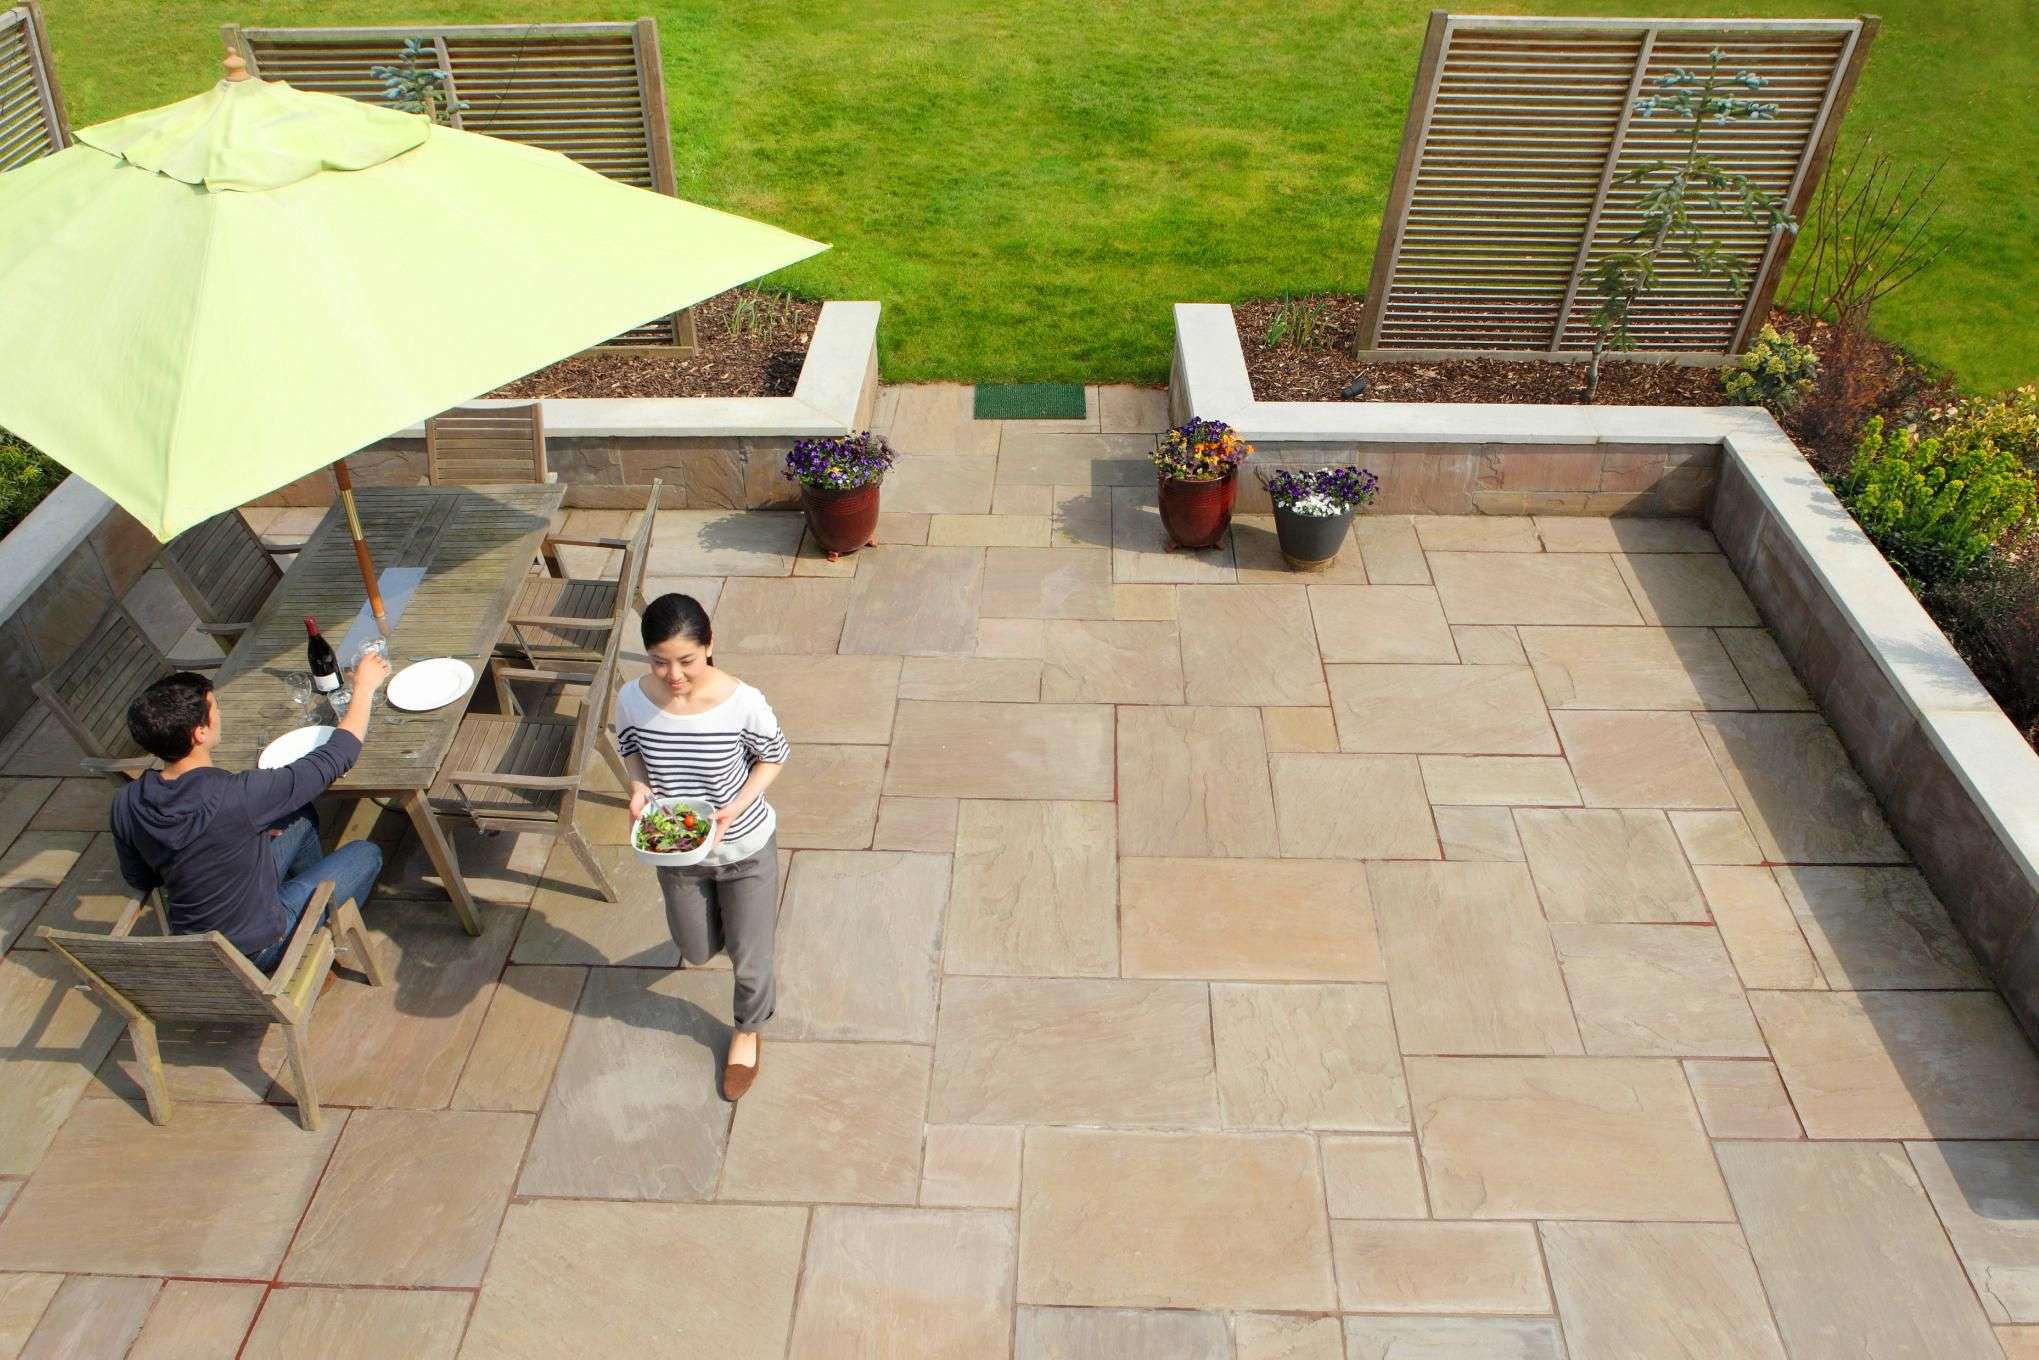 Types of Tiles You Can Use for Outdoor Patios